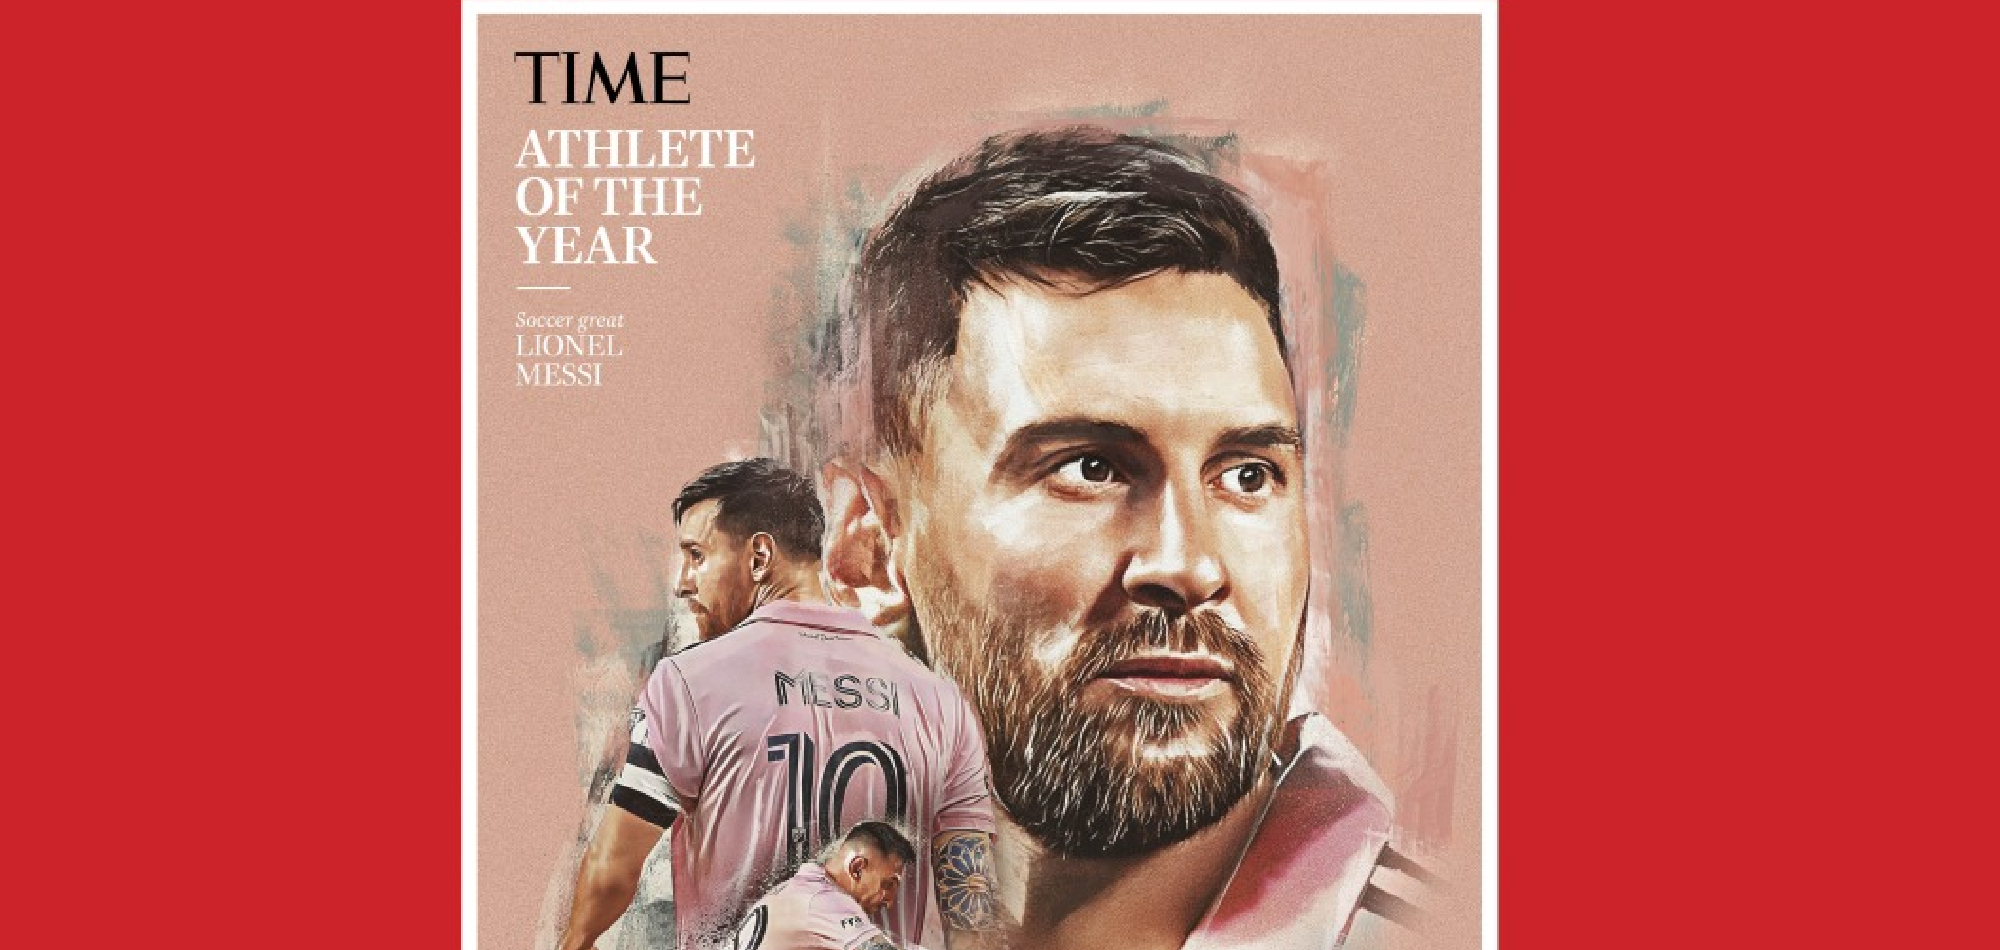 Messi named Time